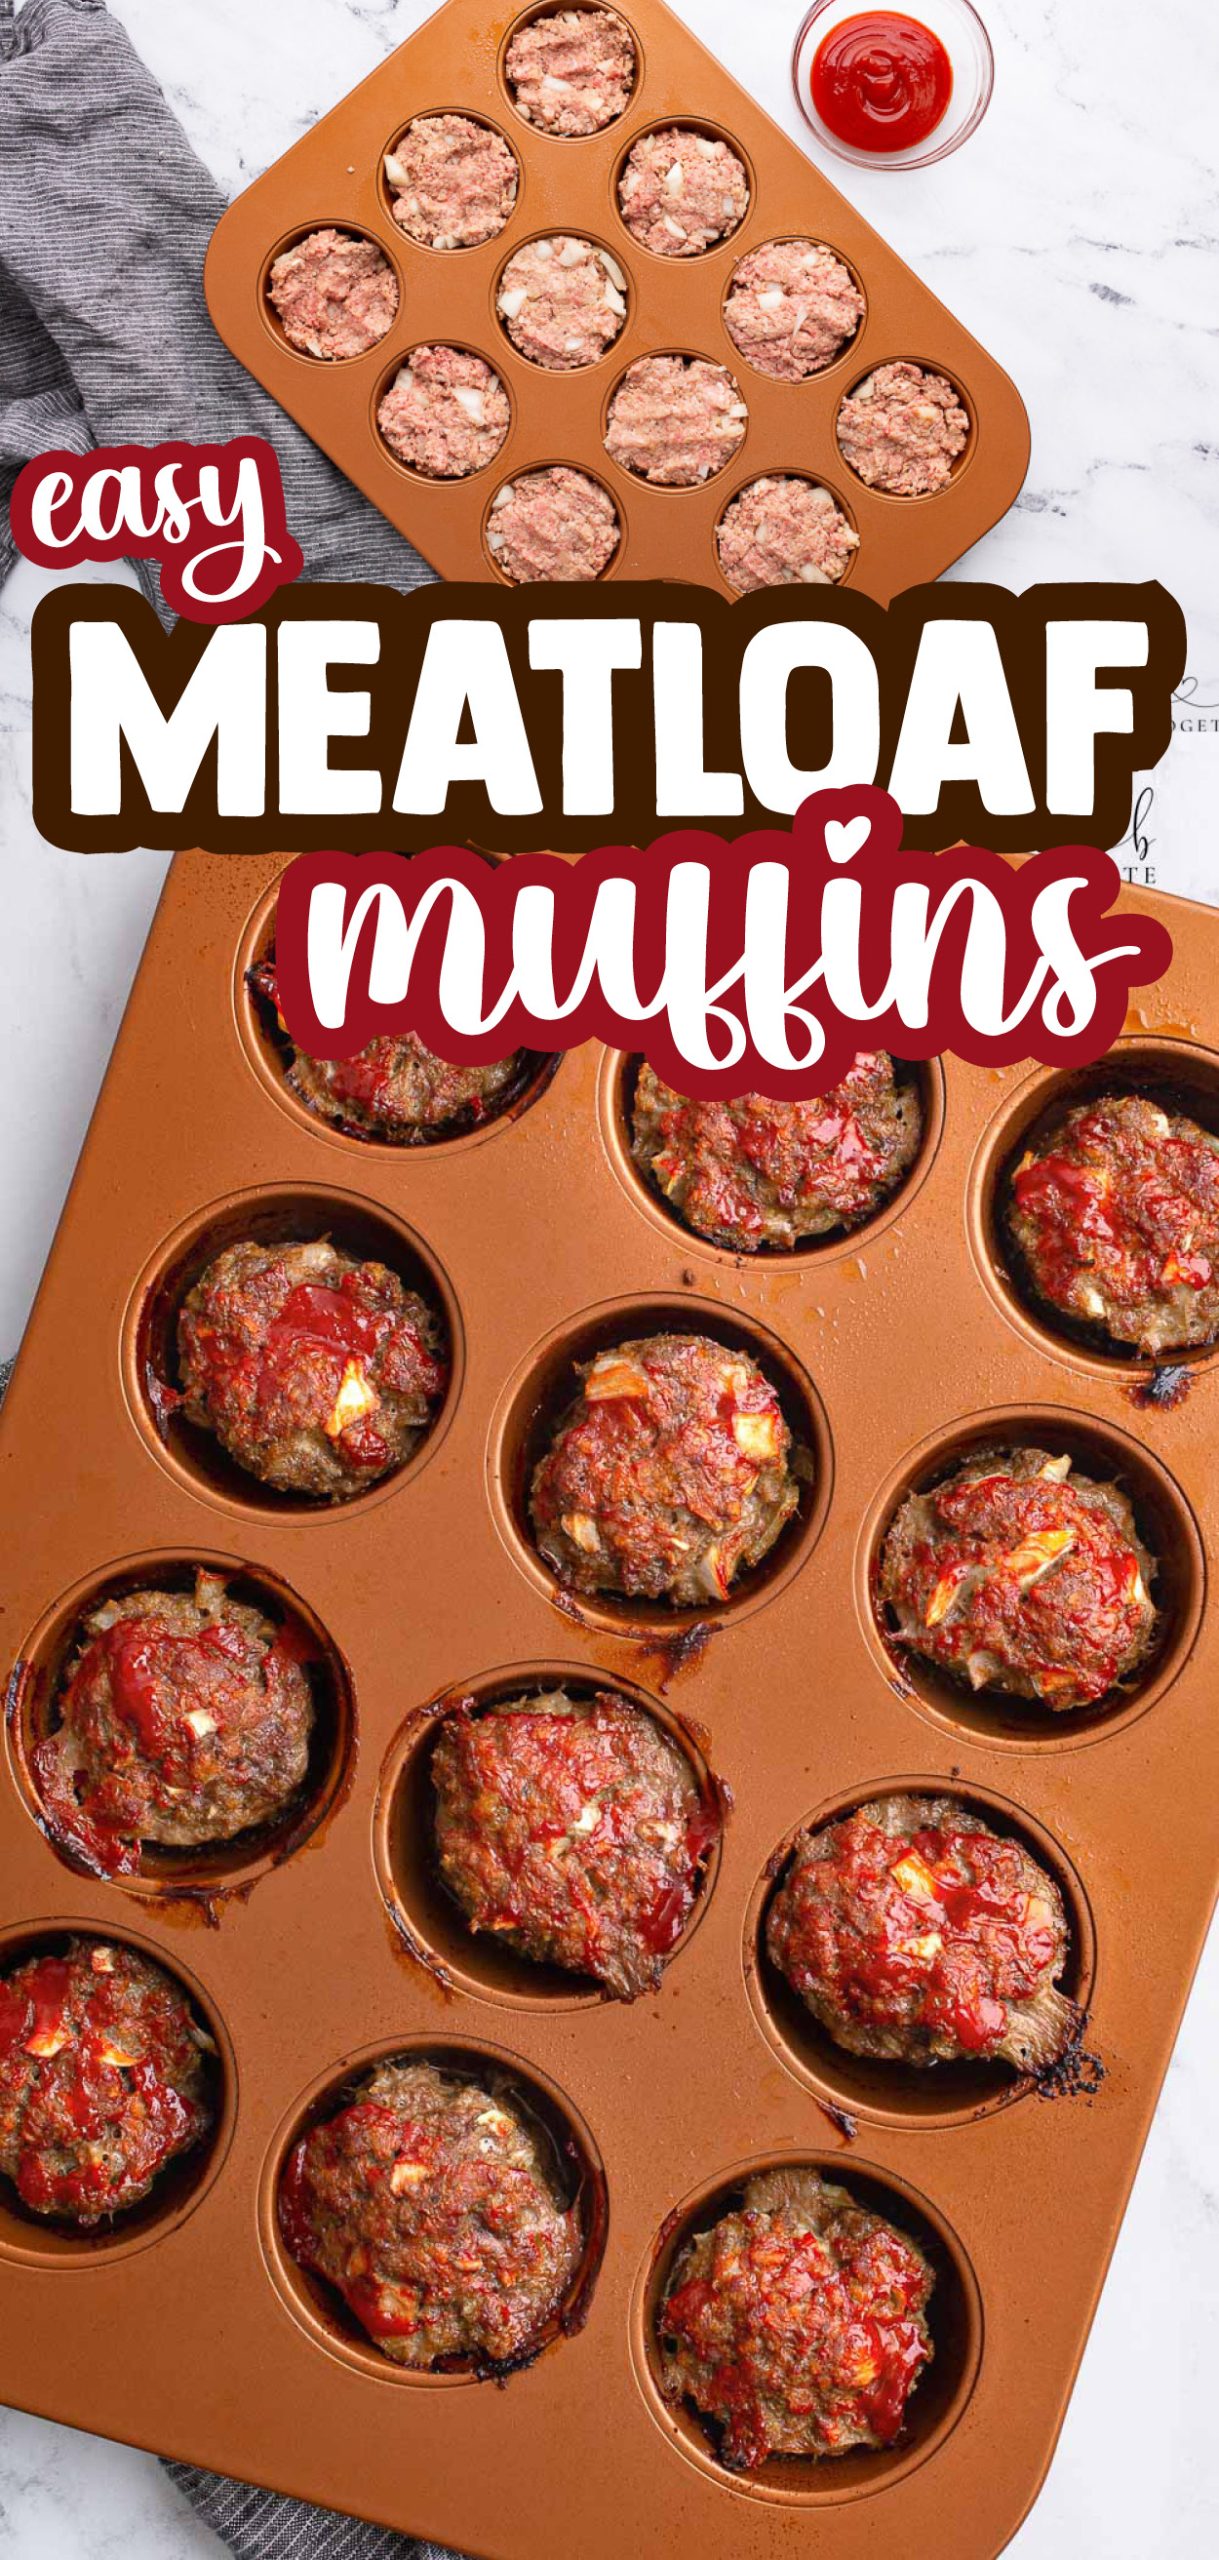 This freezer-friendly meatloaf recipe is definitely one to keep! Mini Meatloaf Muffins made in a muffin tin are easy to make and quick to bake, plus the leftovers are delicious!